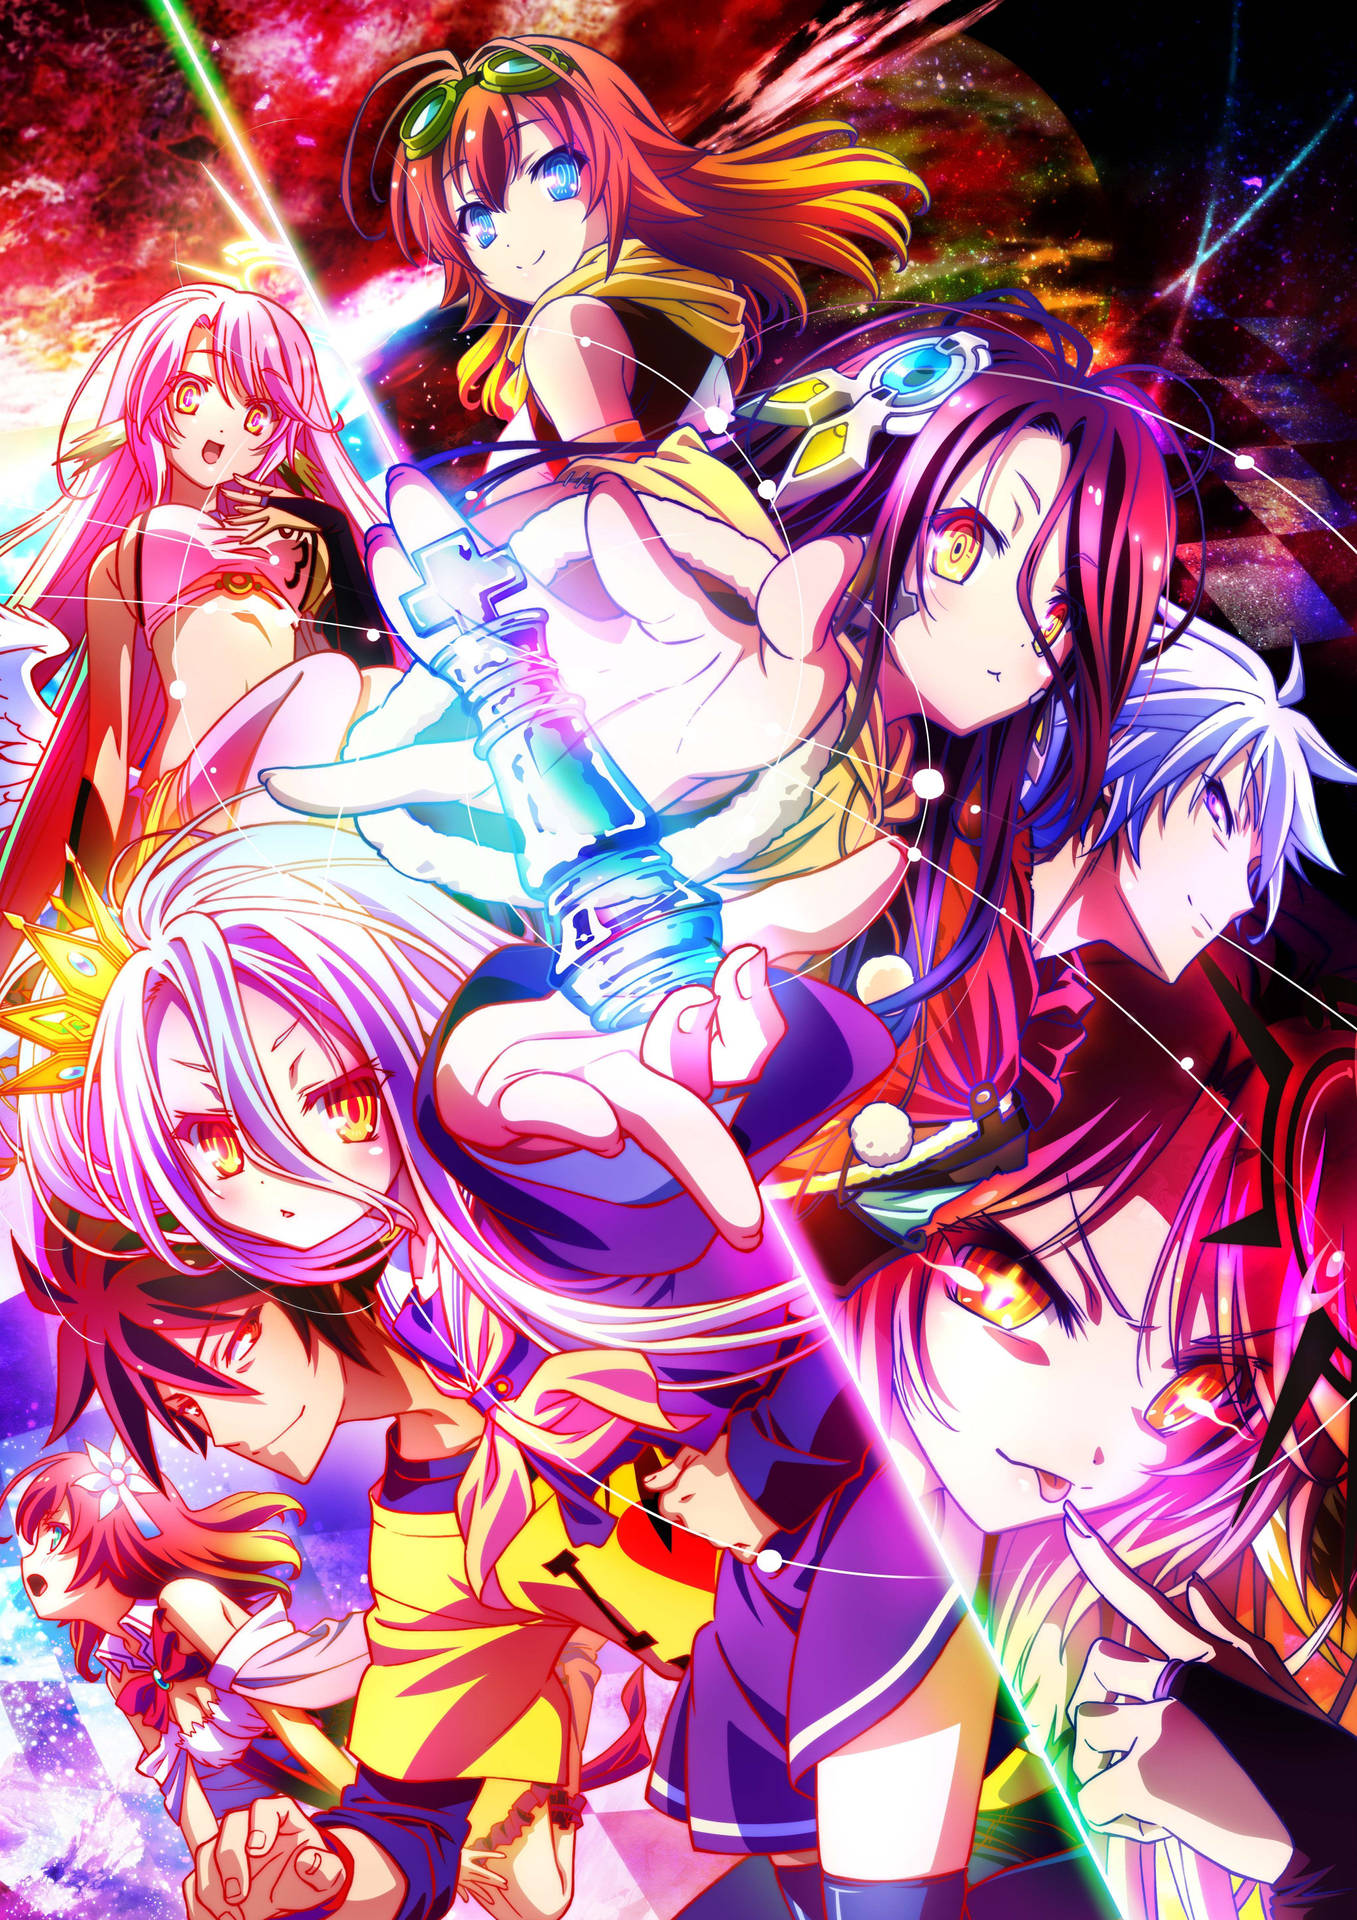 Step Into A World Of Strategy And Adventure With The Film No Game No Life: Zero! Background